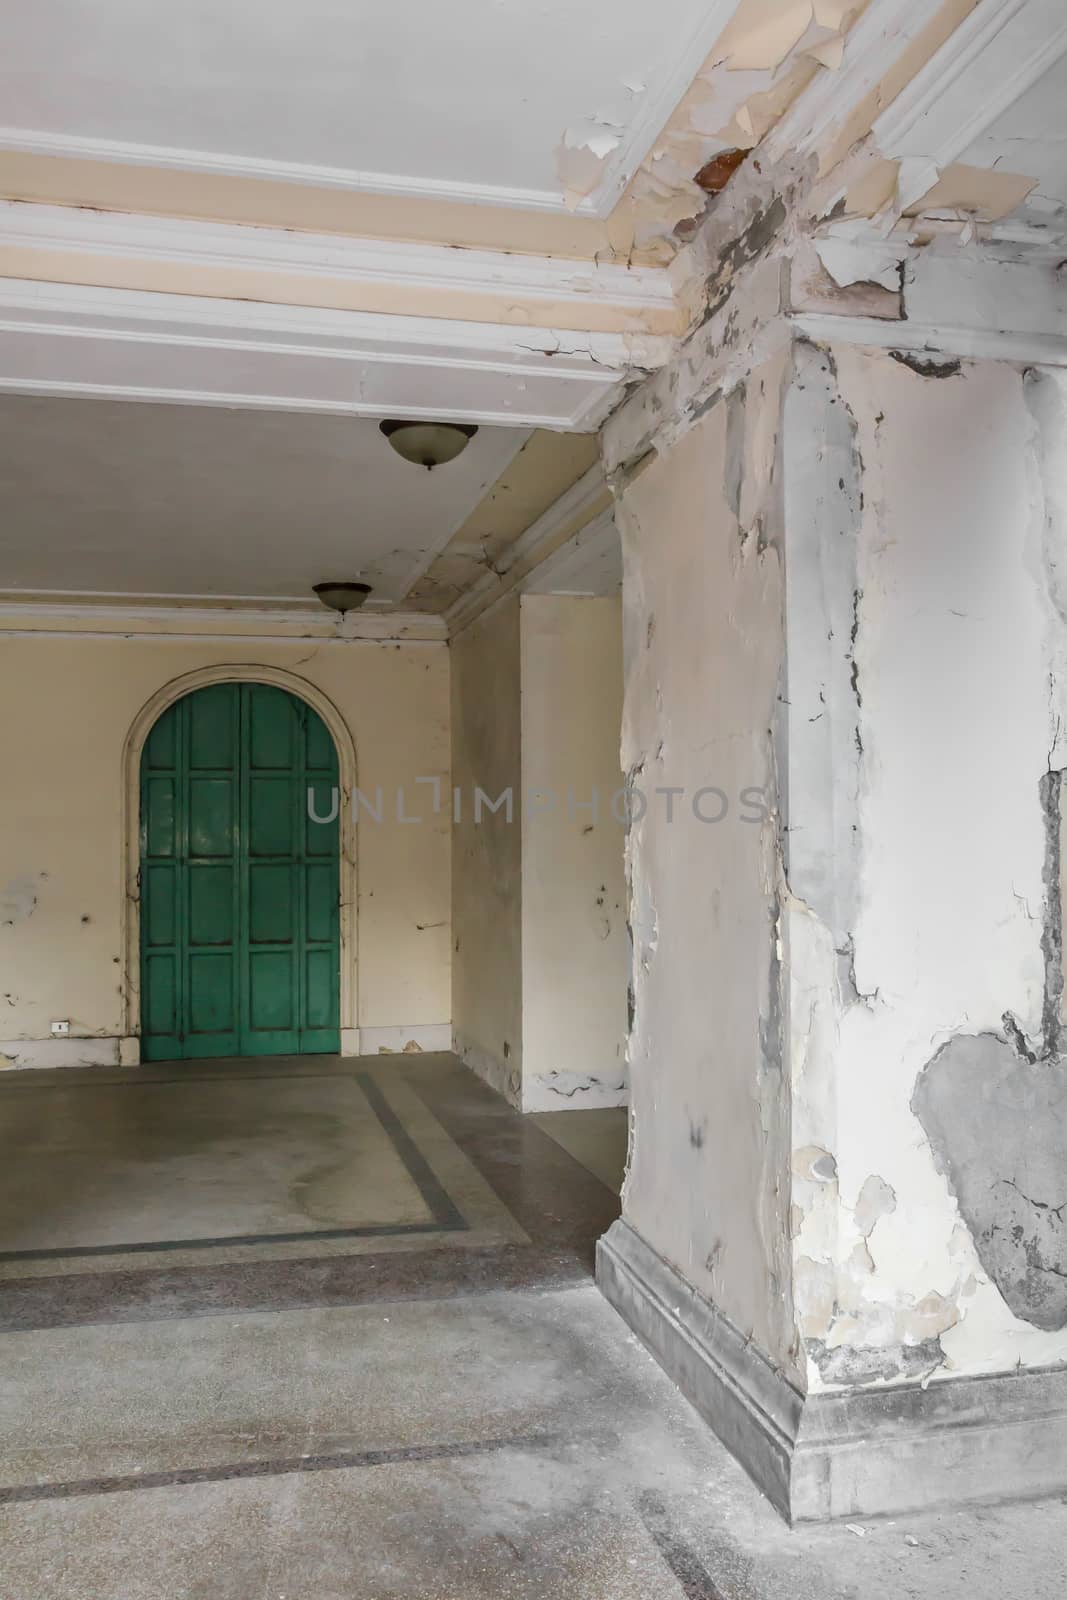 Exterior of an old abandoned hotel with a peeling wall and mold. Ancient green door with old chandeliers on the ceiling.